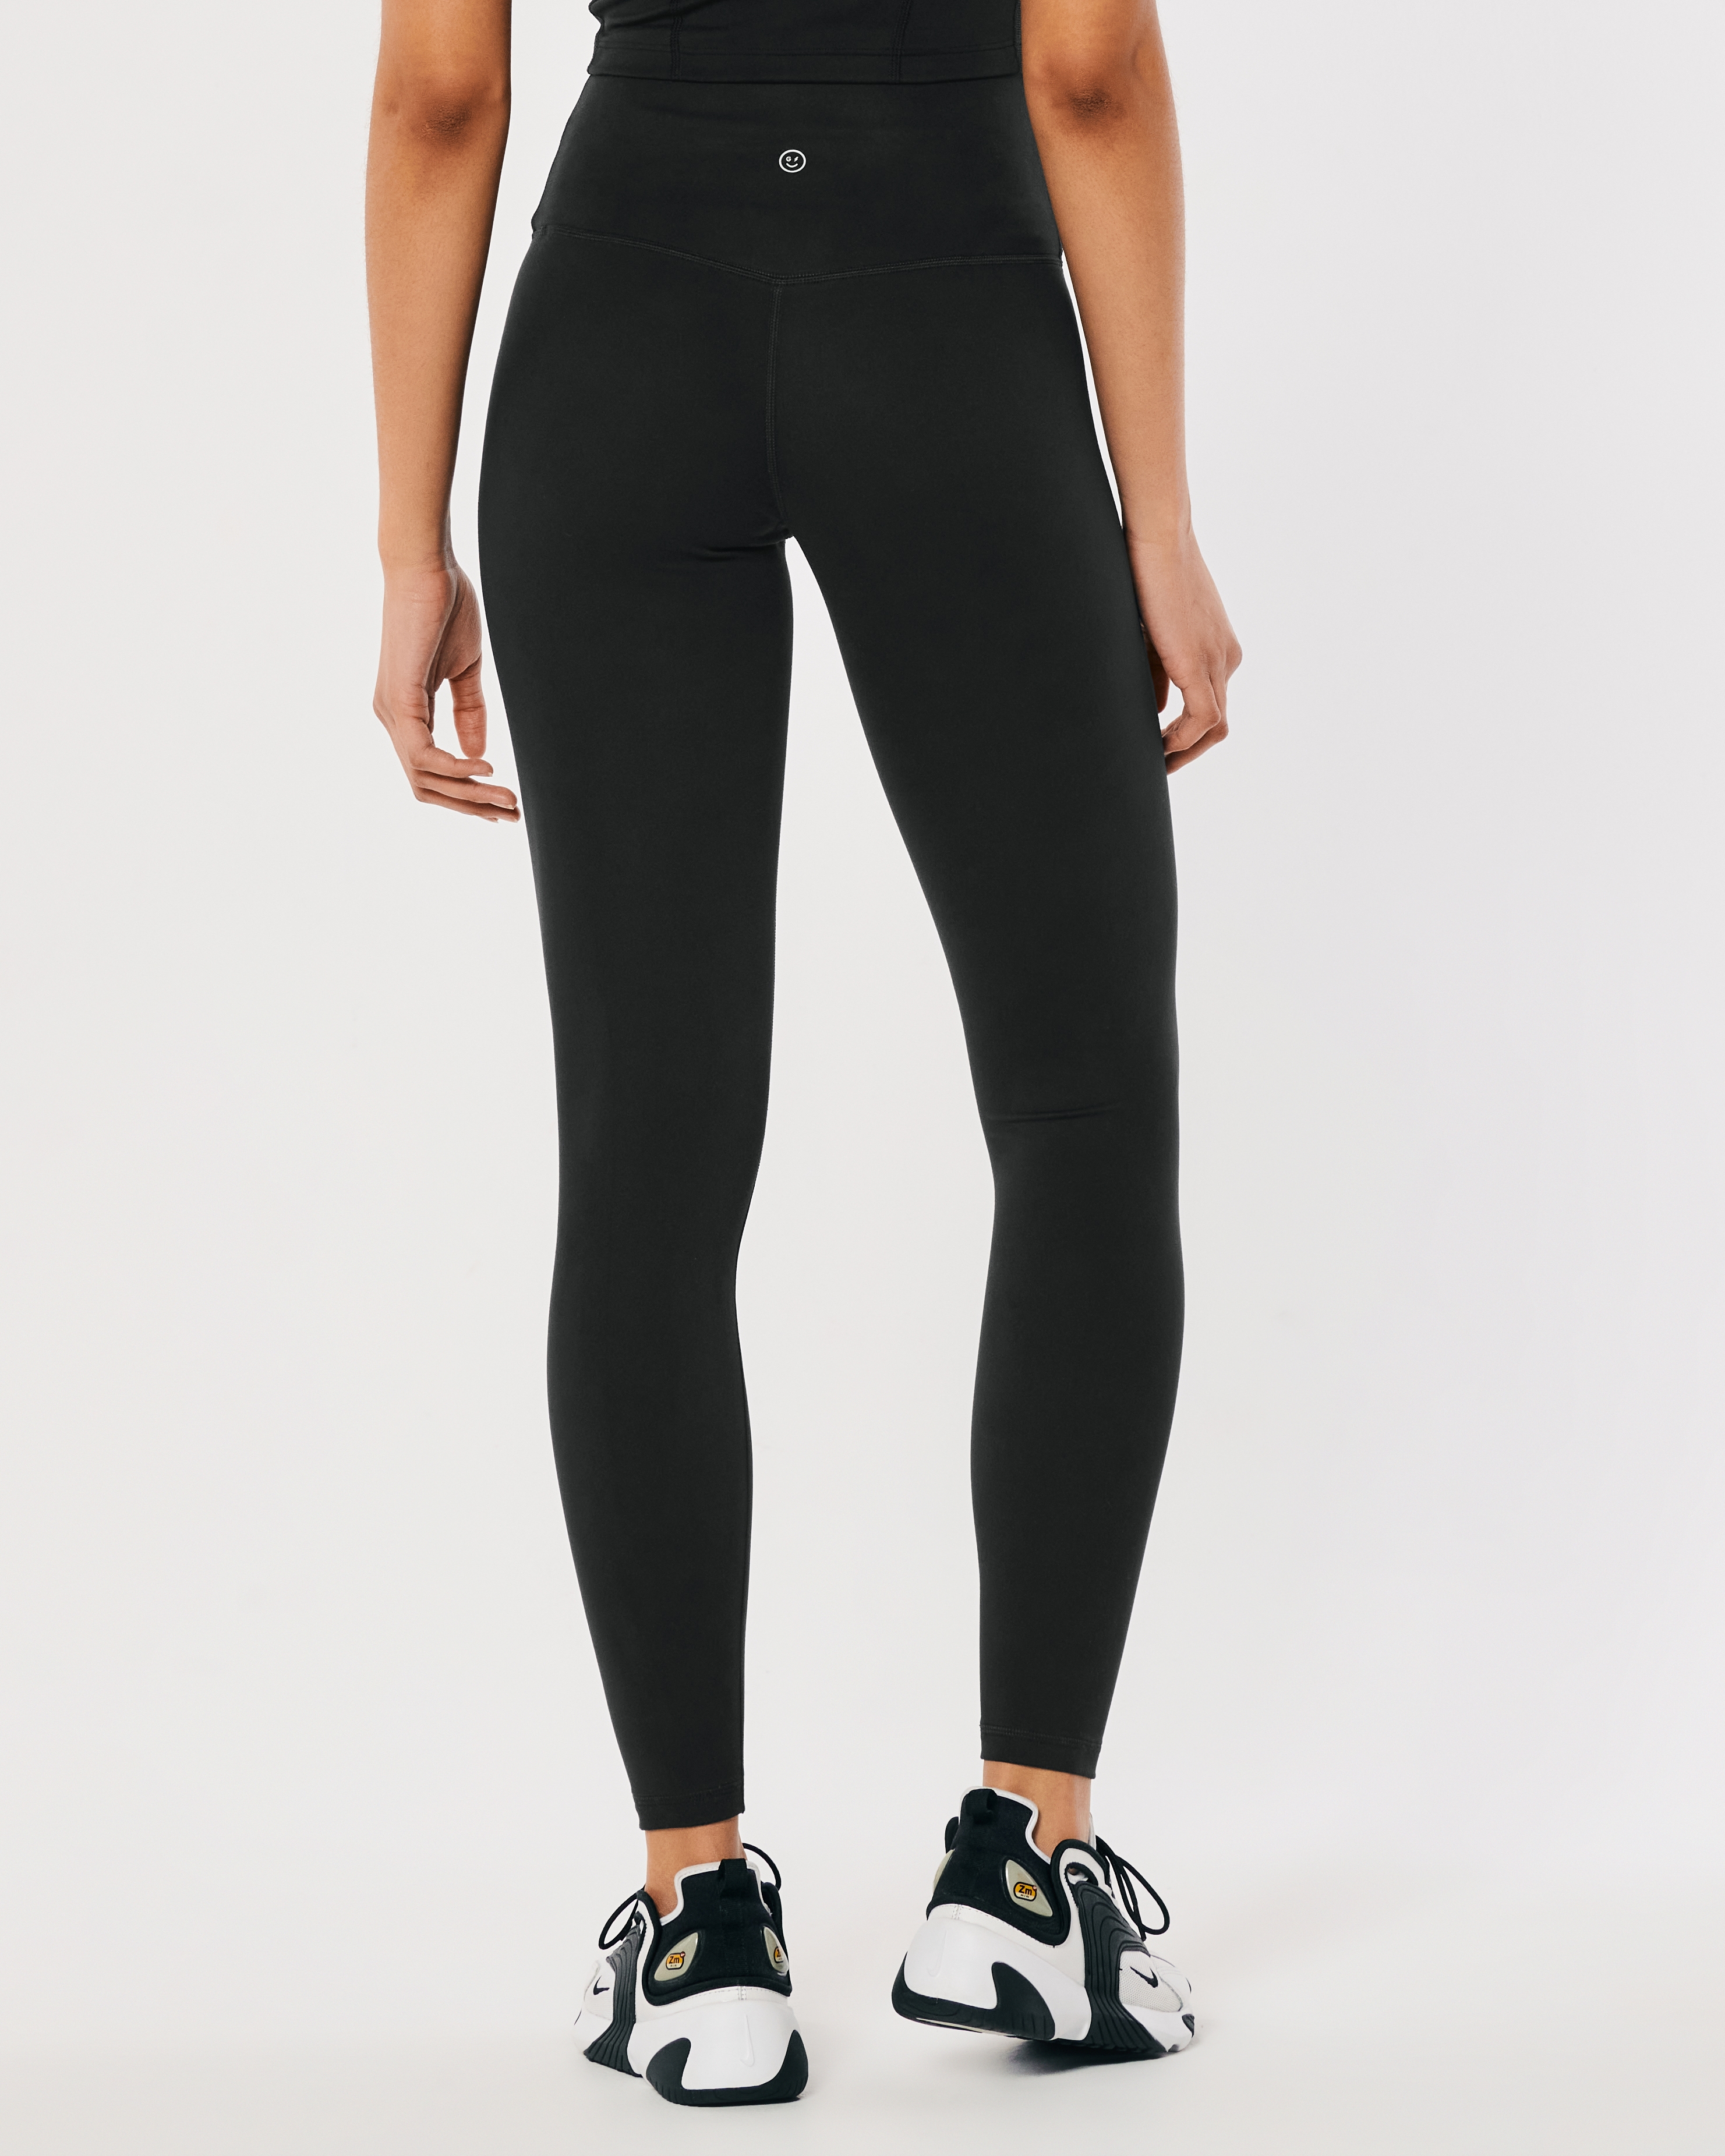 Gilly Hicks Active Recharge Mini Flare Legging